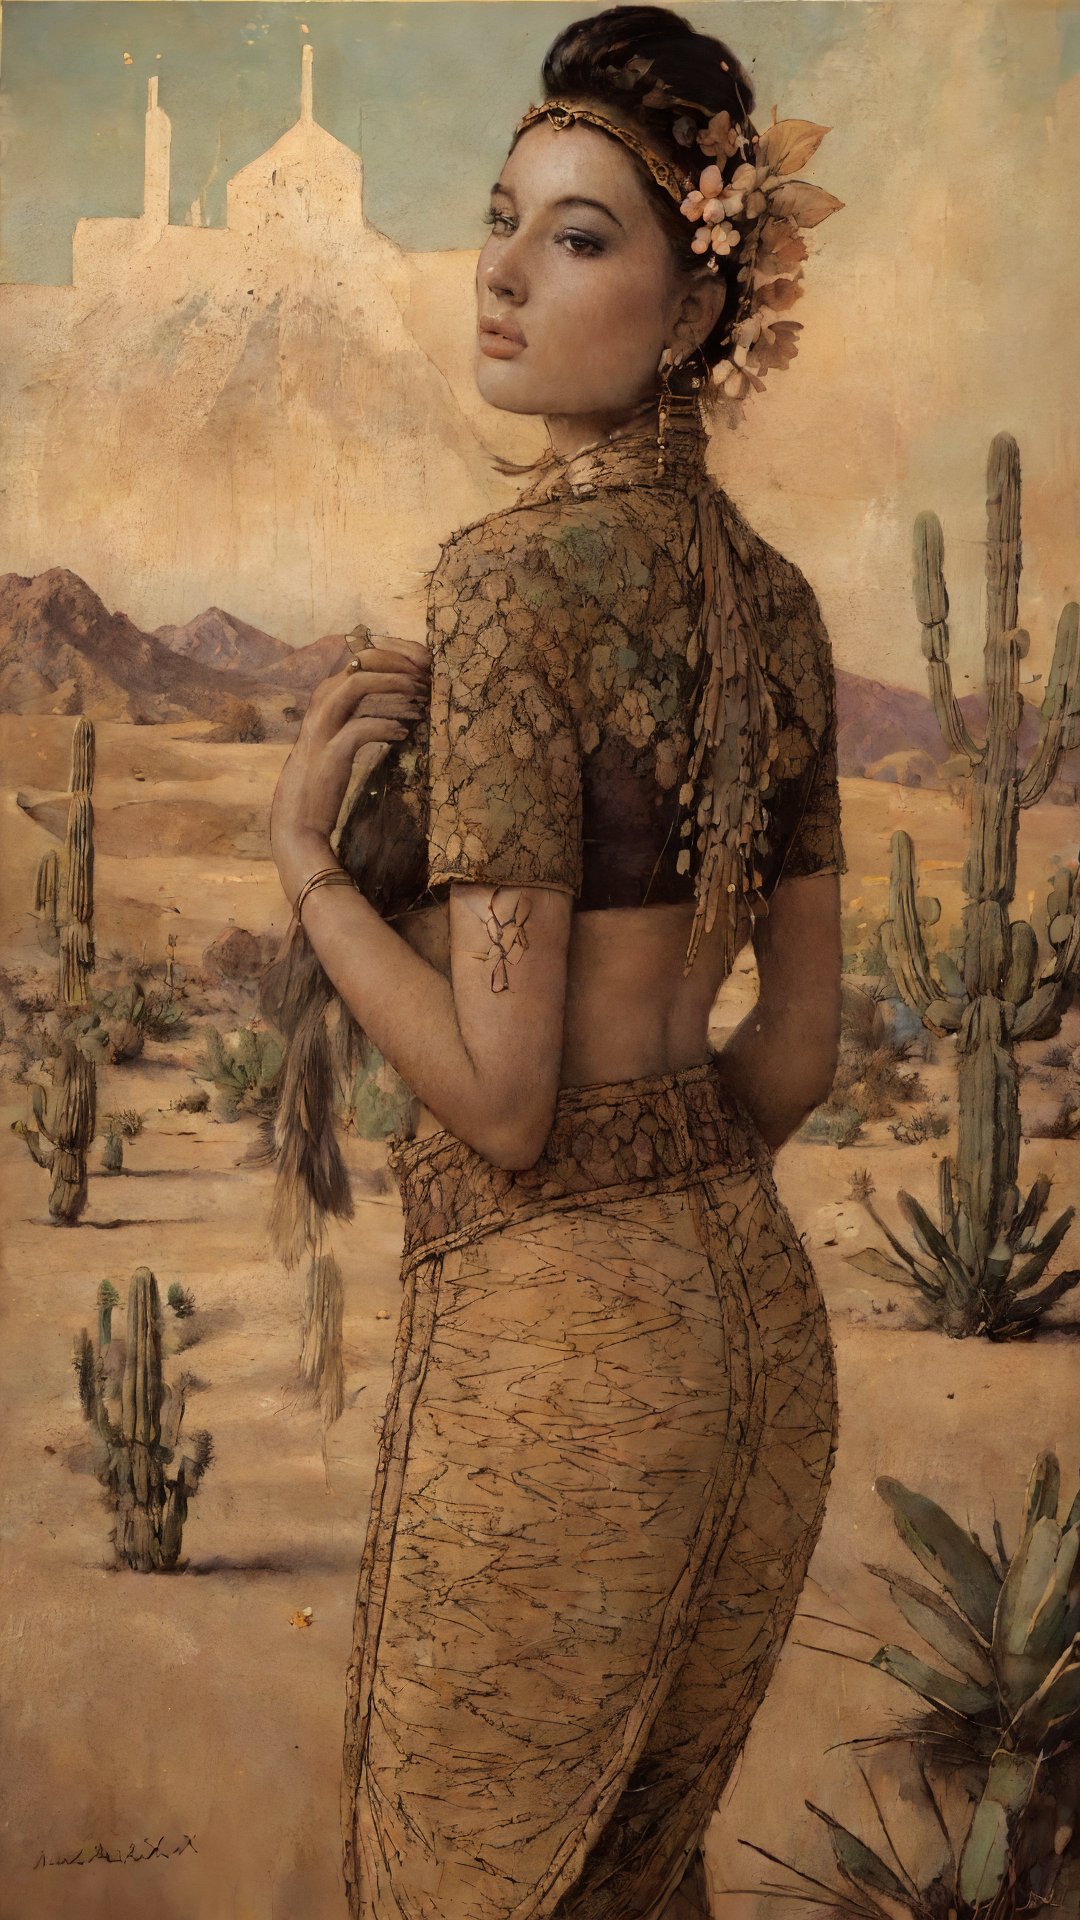 indie illustration art, a gorgeous babe in the middle of a desert by xkbx, back side view, artistic ,fineart , illustration , artisan, skillfully crafted art, cactuses, flowers, ultra detailed lines and textures ,